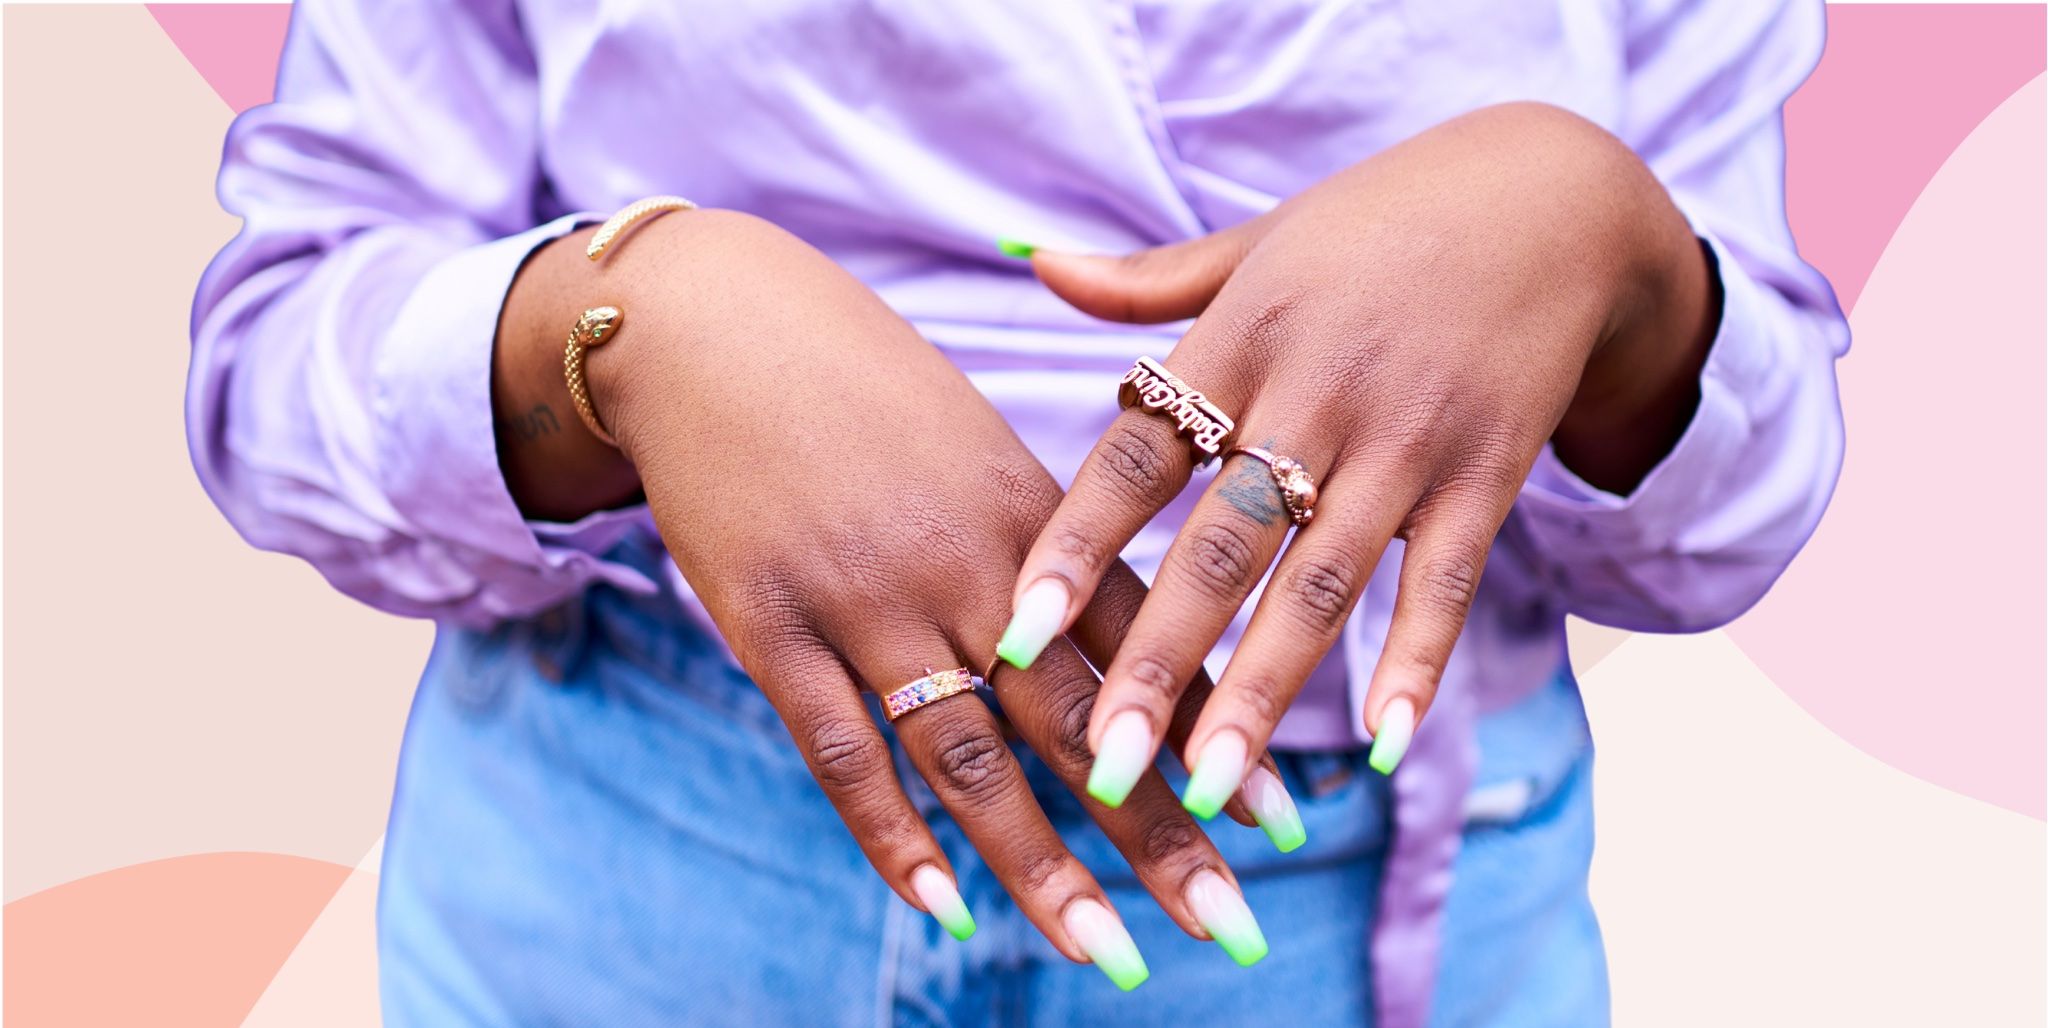 Gel nails VS Shellac nails: What's the difference; which is best?